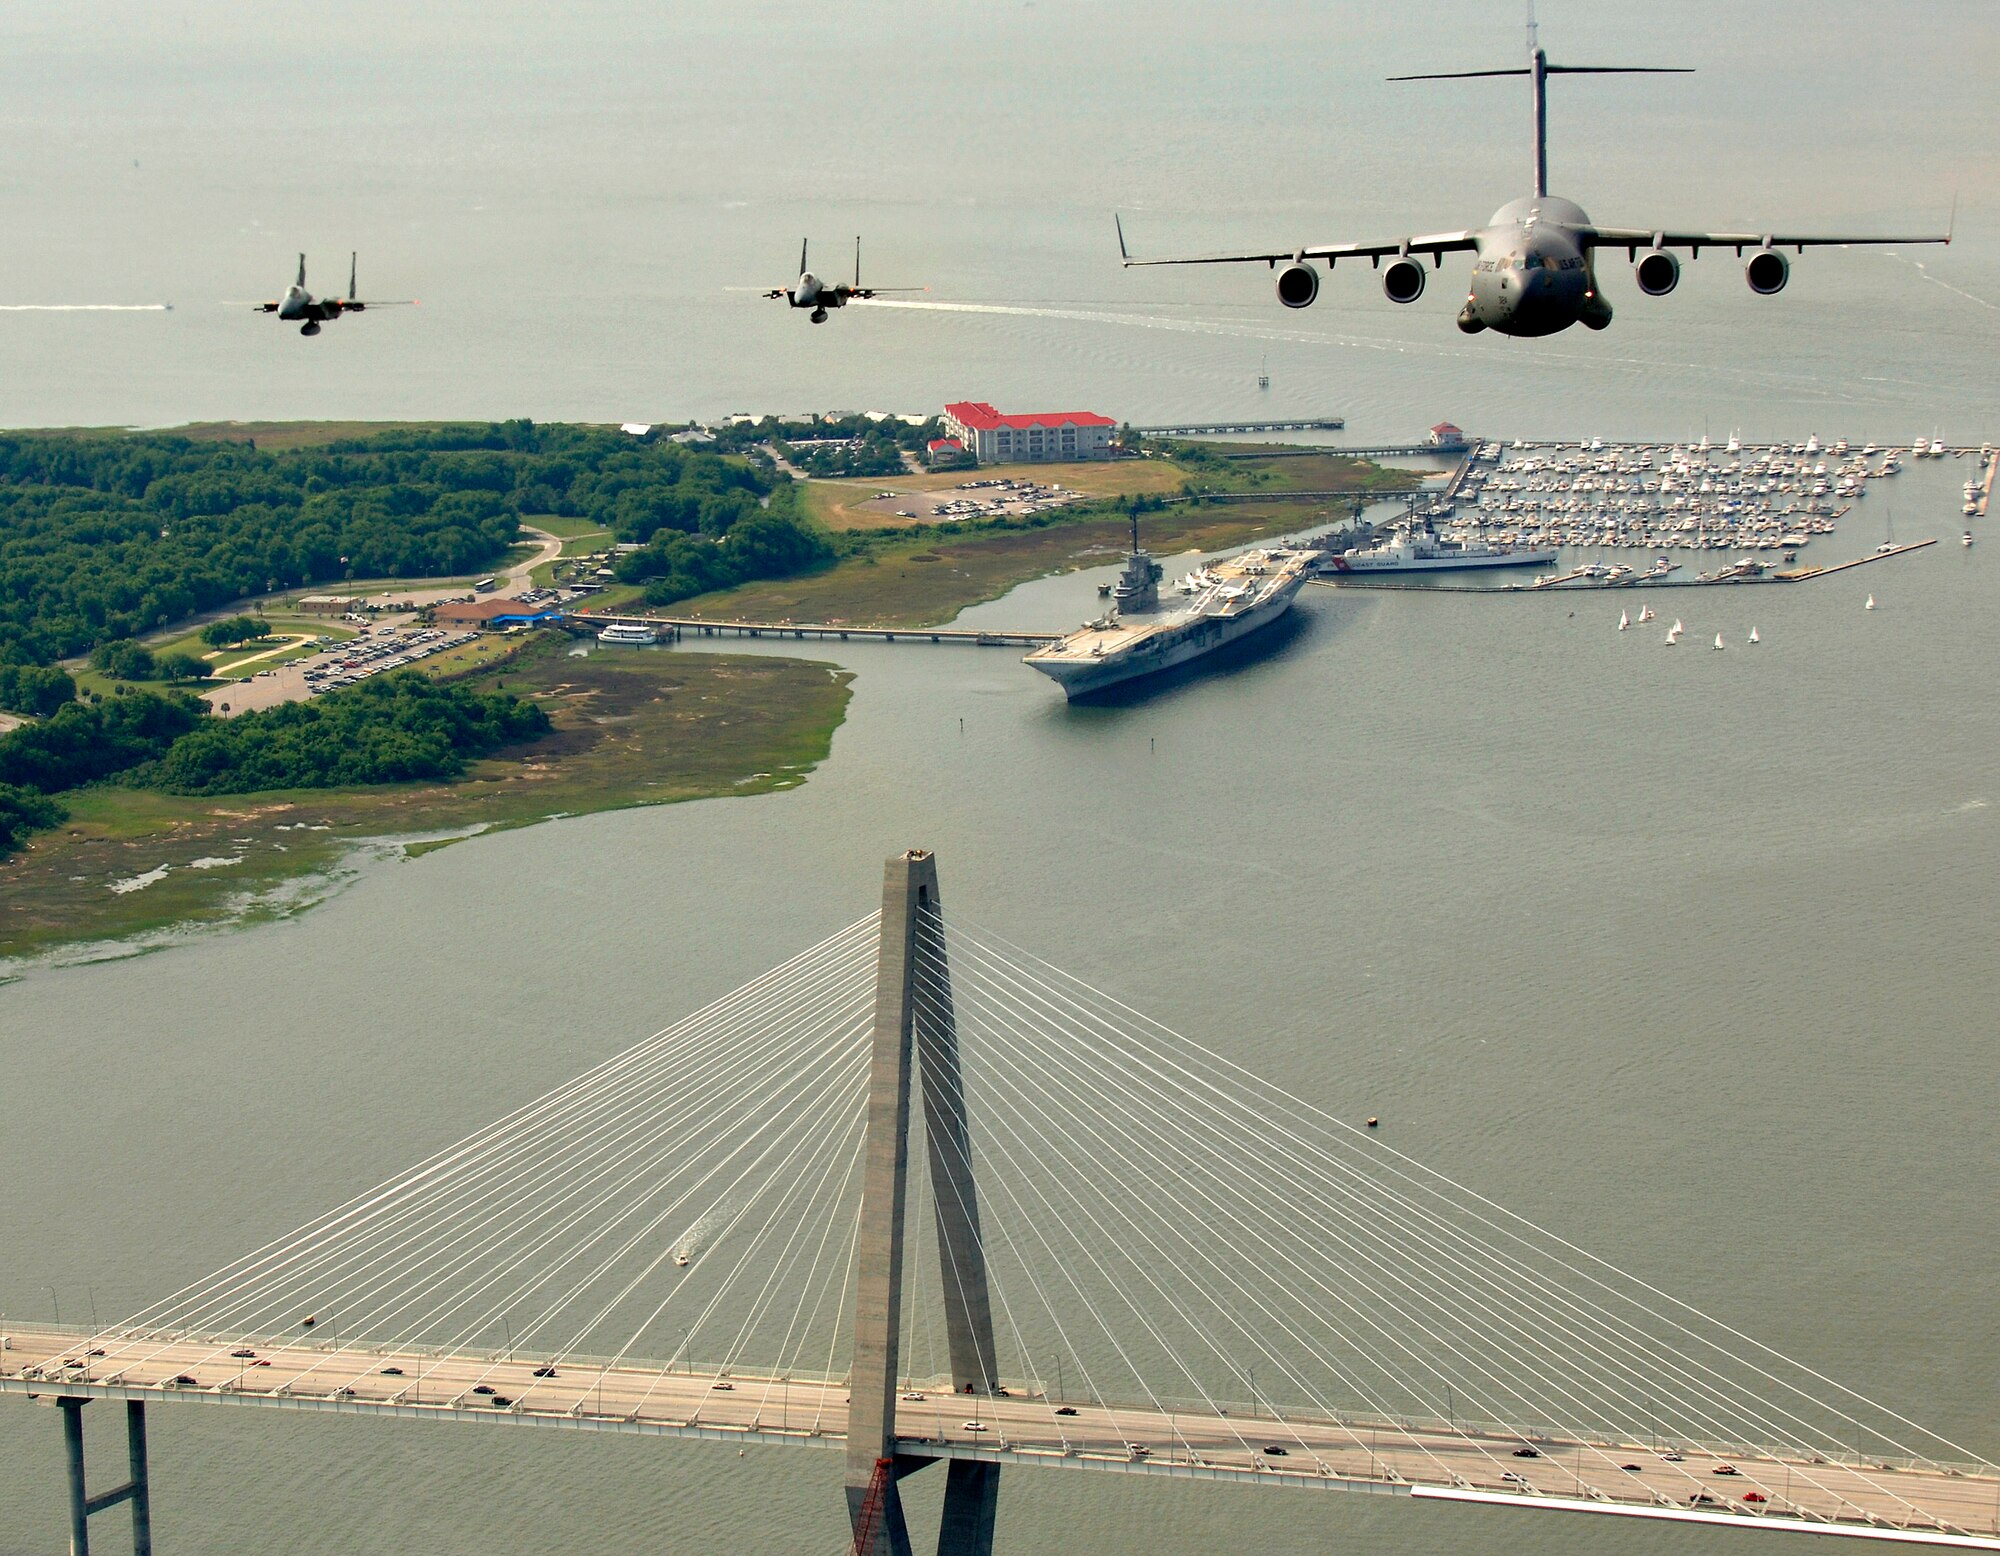 Two F-15 Eagles from the 60th Fighter Squadron, Eglin Air Force Base, Fla., escort a C-17 Globemaster III from the 14th Airlift Squadron, Charleston AFB, S.C., as they fly over the USS Yorktown and the Arthur J. Ravenel Jr. Bridge in the Charleston, S.C., area during a local training mission on Tuesday, May 16, 2006. (U.S. Air Force photo/Tech. Sgt. Russell E. Cooley IV)